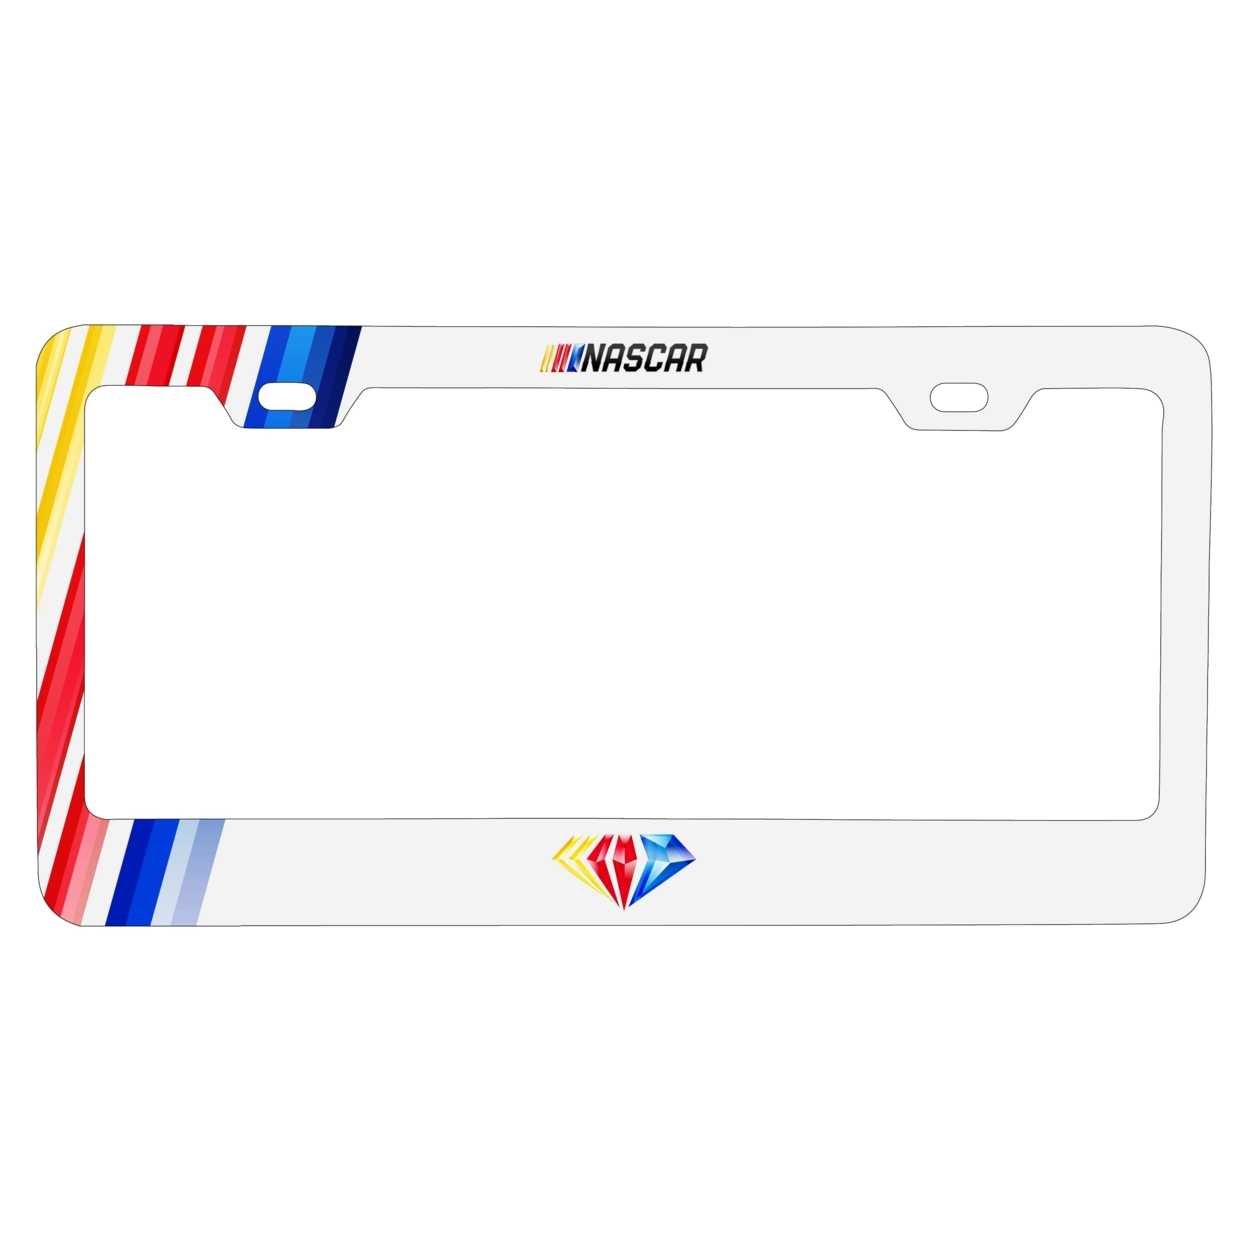 NASCAR 75 Anniversary Officially Licensed Metal License Plate Frame